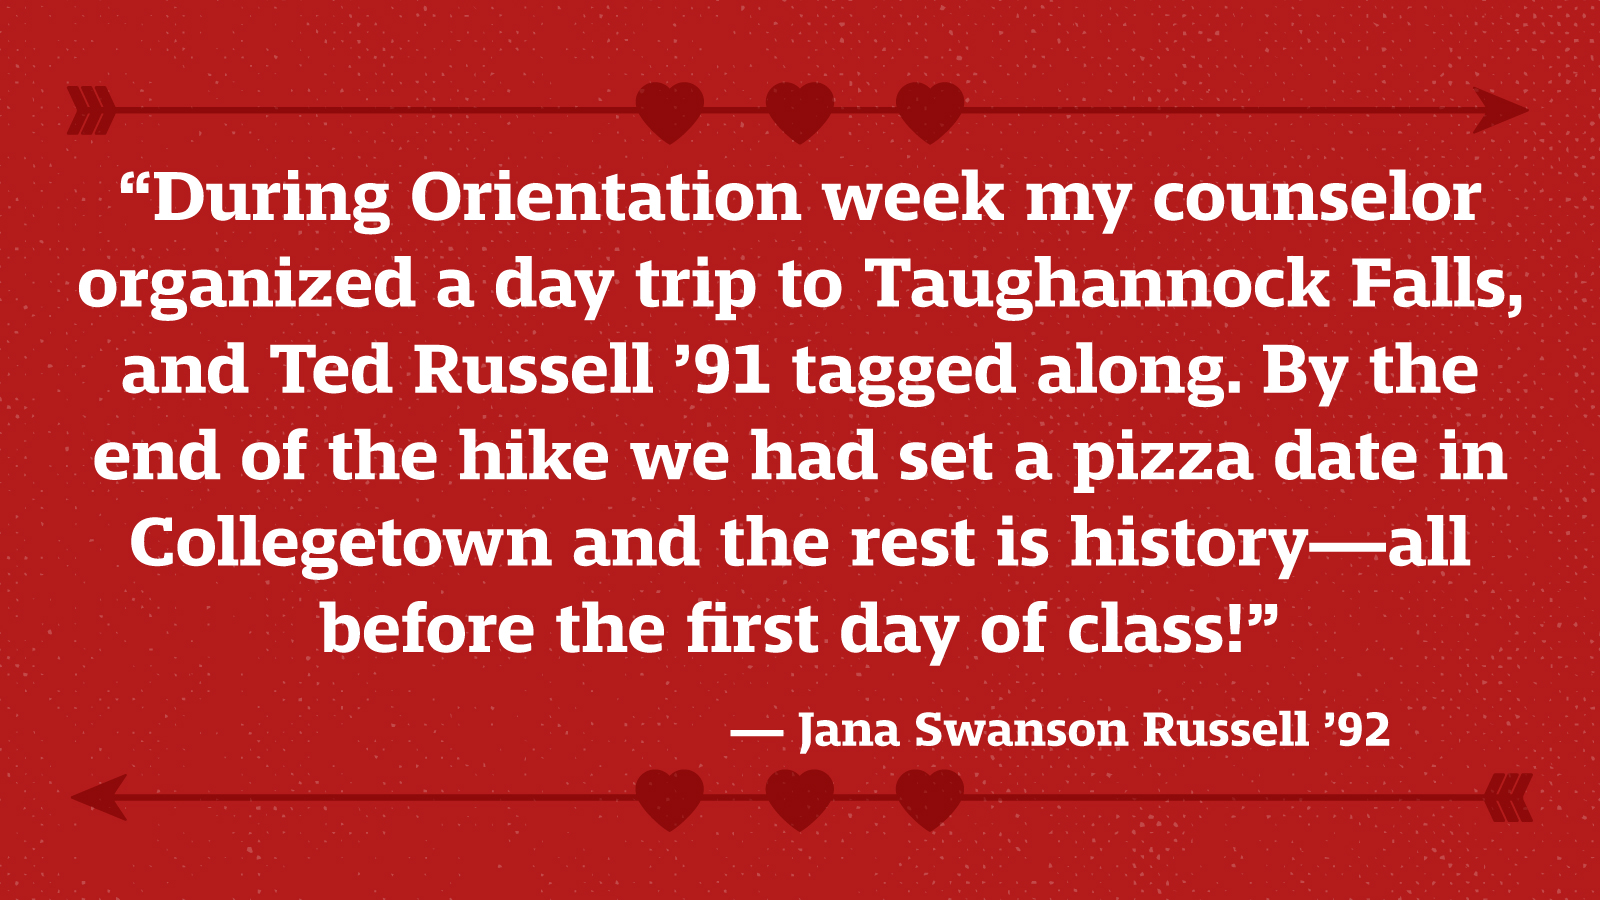 “During Orientation week my counselor organized a day trip to Taughannock Falls, and Ted Russell ’91 tagged along. By the end of the hike we had set a pizza date in Collegetown and the rest is history—all before the first day of class!” — Jana Swanson Russell ’92